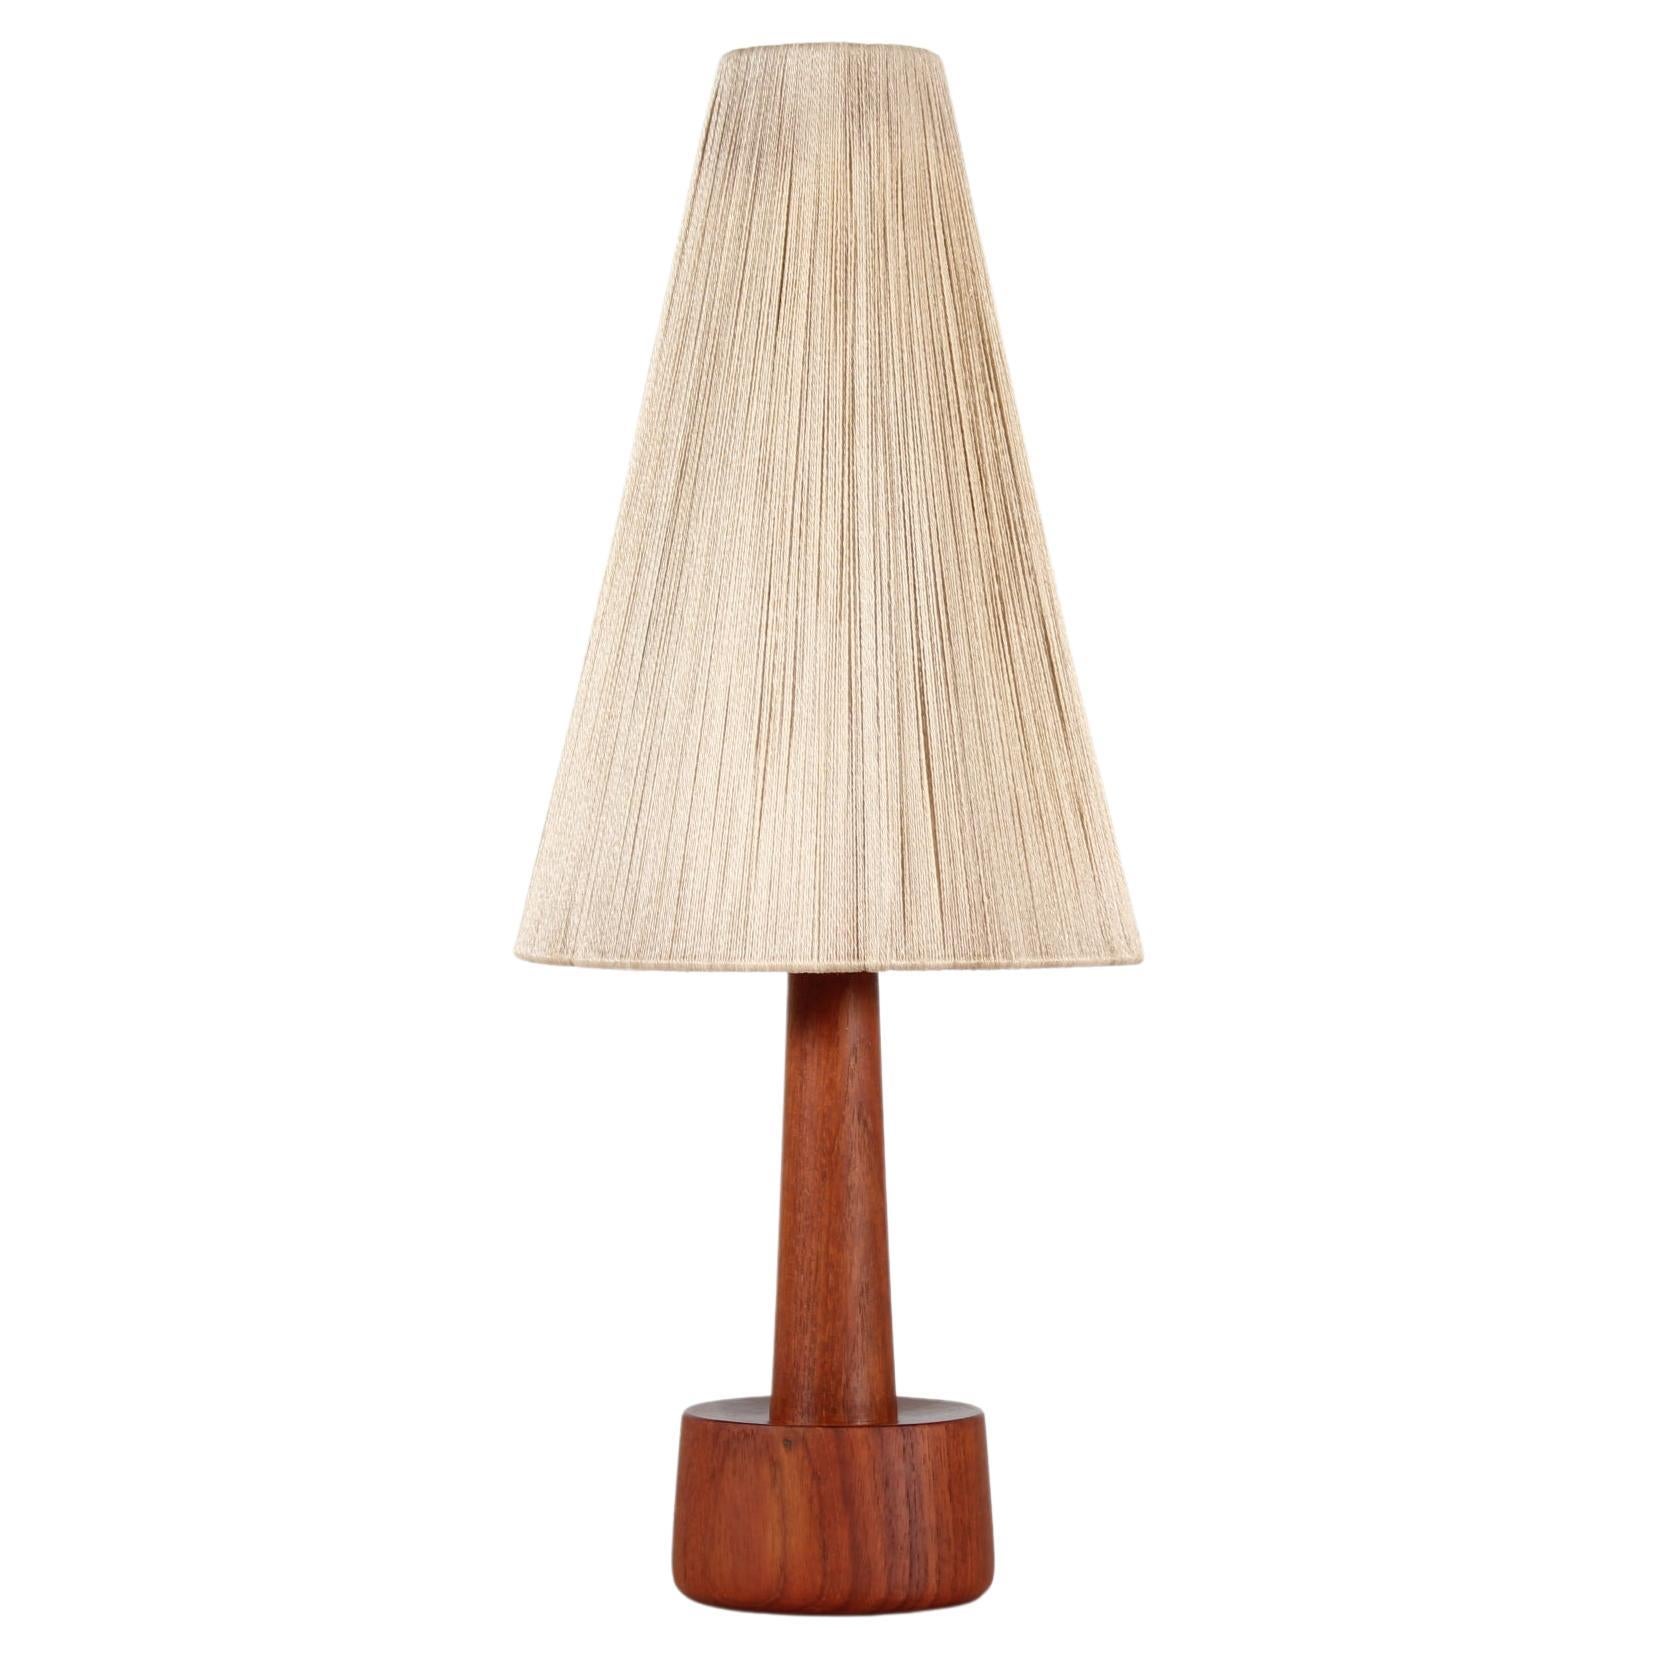 Danish Modernist Table Lamp of Teak with Cone-Shaped Yarn Shade 1970s